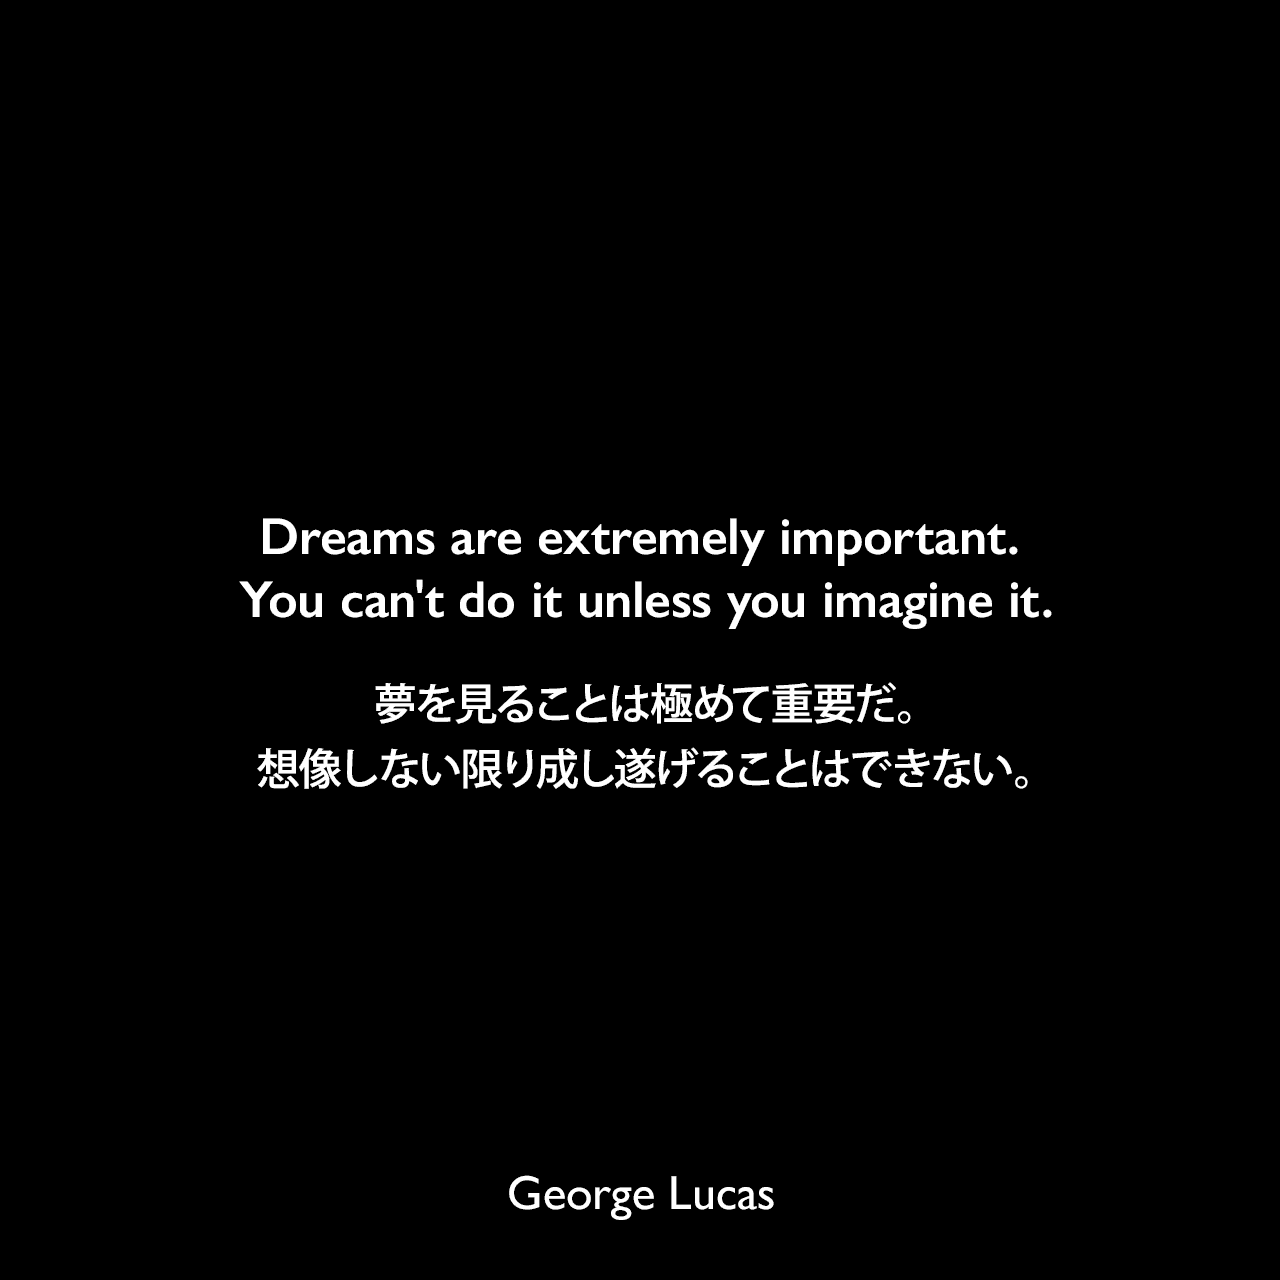 Dreams are extremely important. You can't do it unless you imagine it.夢を見ることは極めて重要だ。想像しない限り成し遂げることはできない。George Lucas